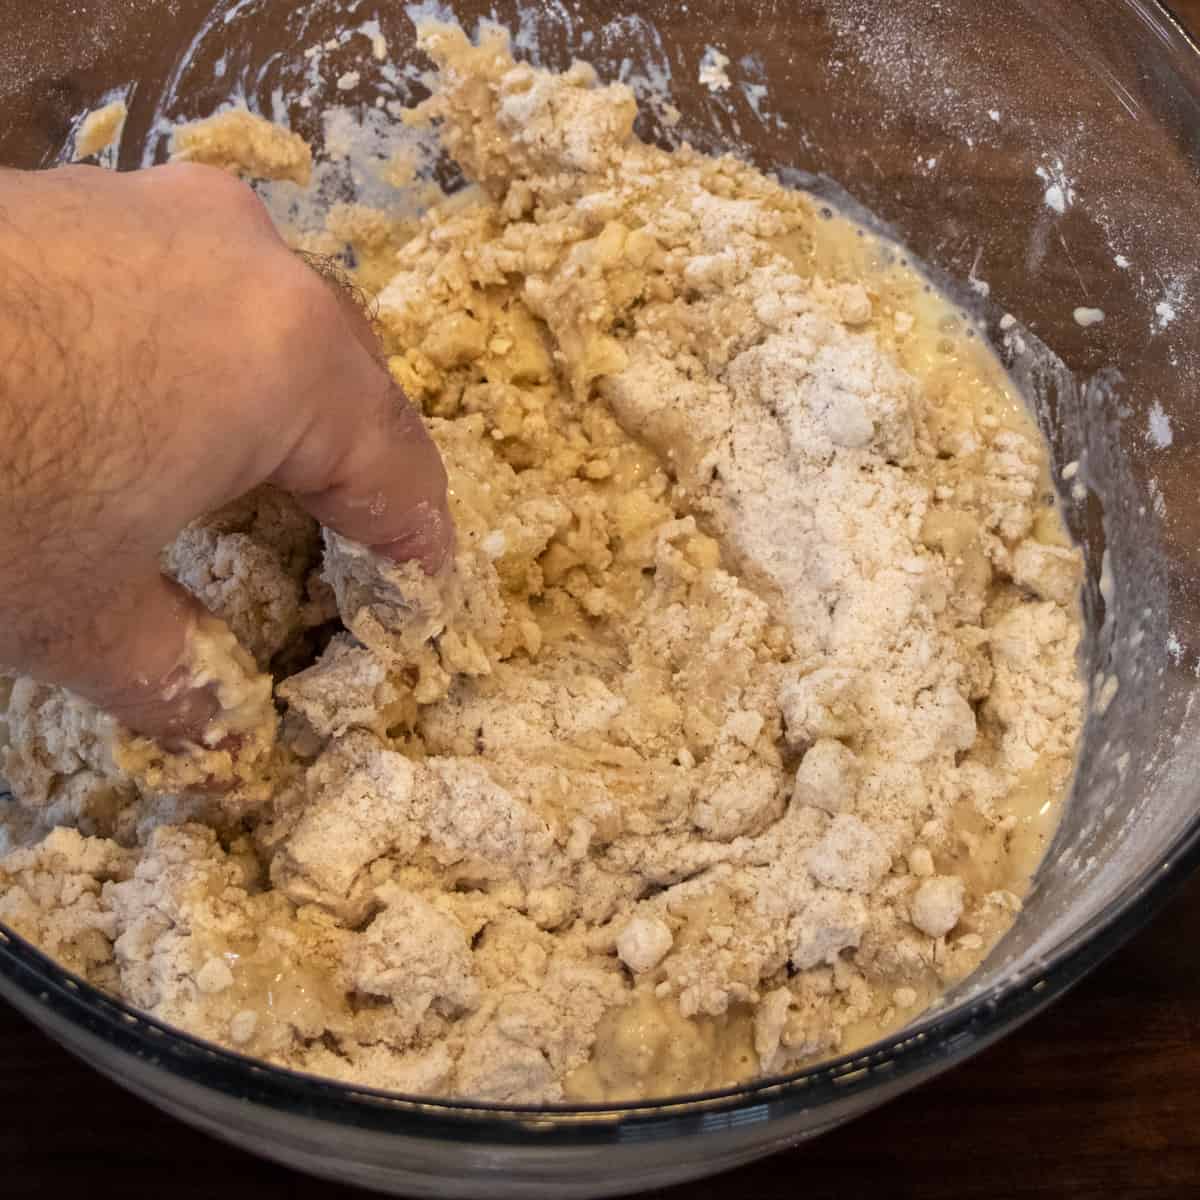 The scone dough being gently mixed together.